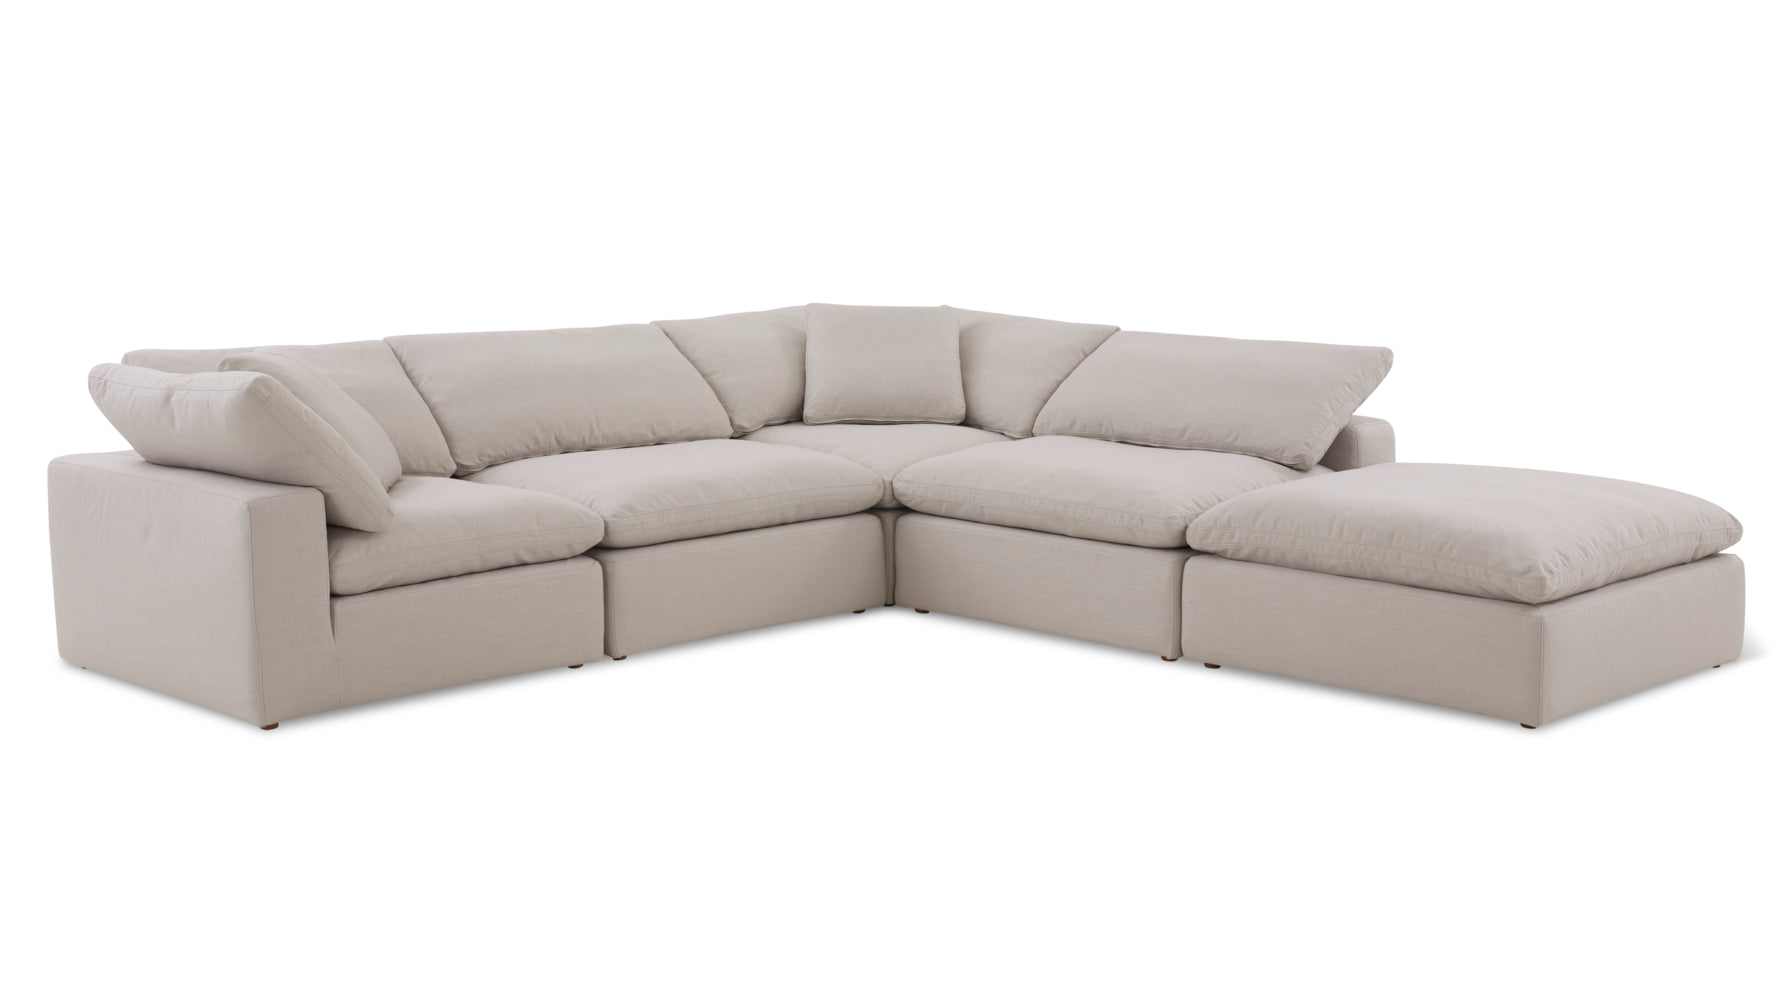 Movie Night™ 5-Piece Modular Sectional, Large, Clay - Image 8